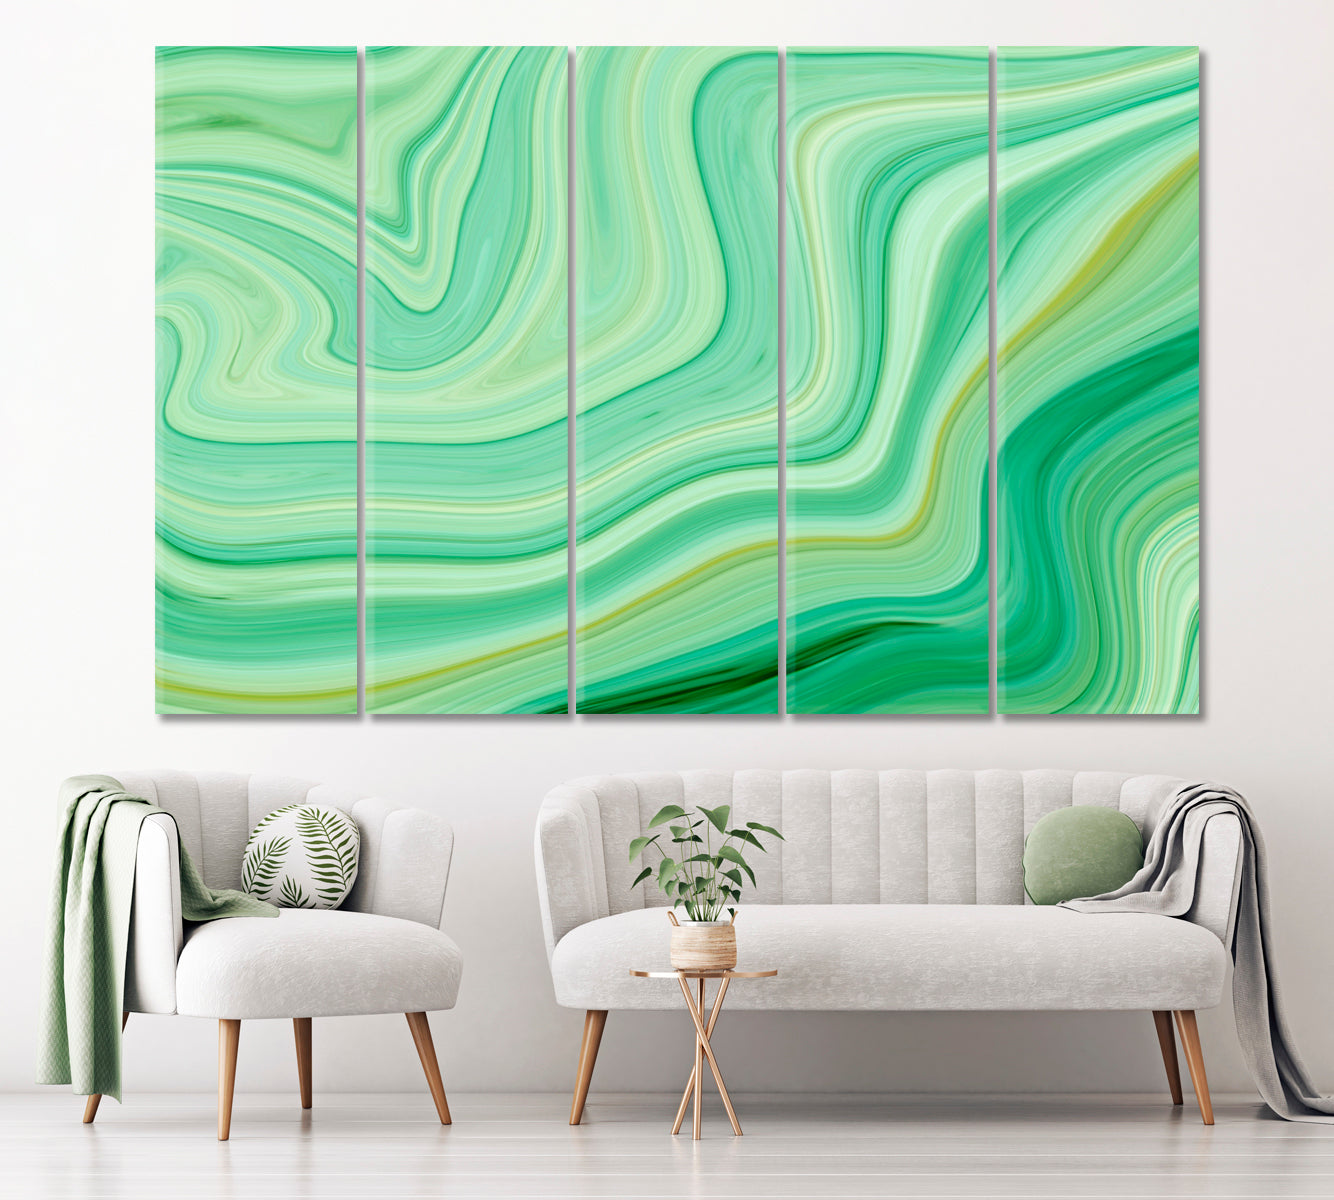 Green Marble Ink Design Canvas Print ArtLexy 5 Panels 36"x24" inches 